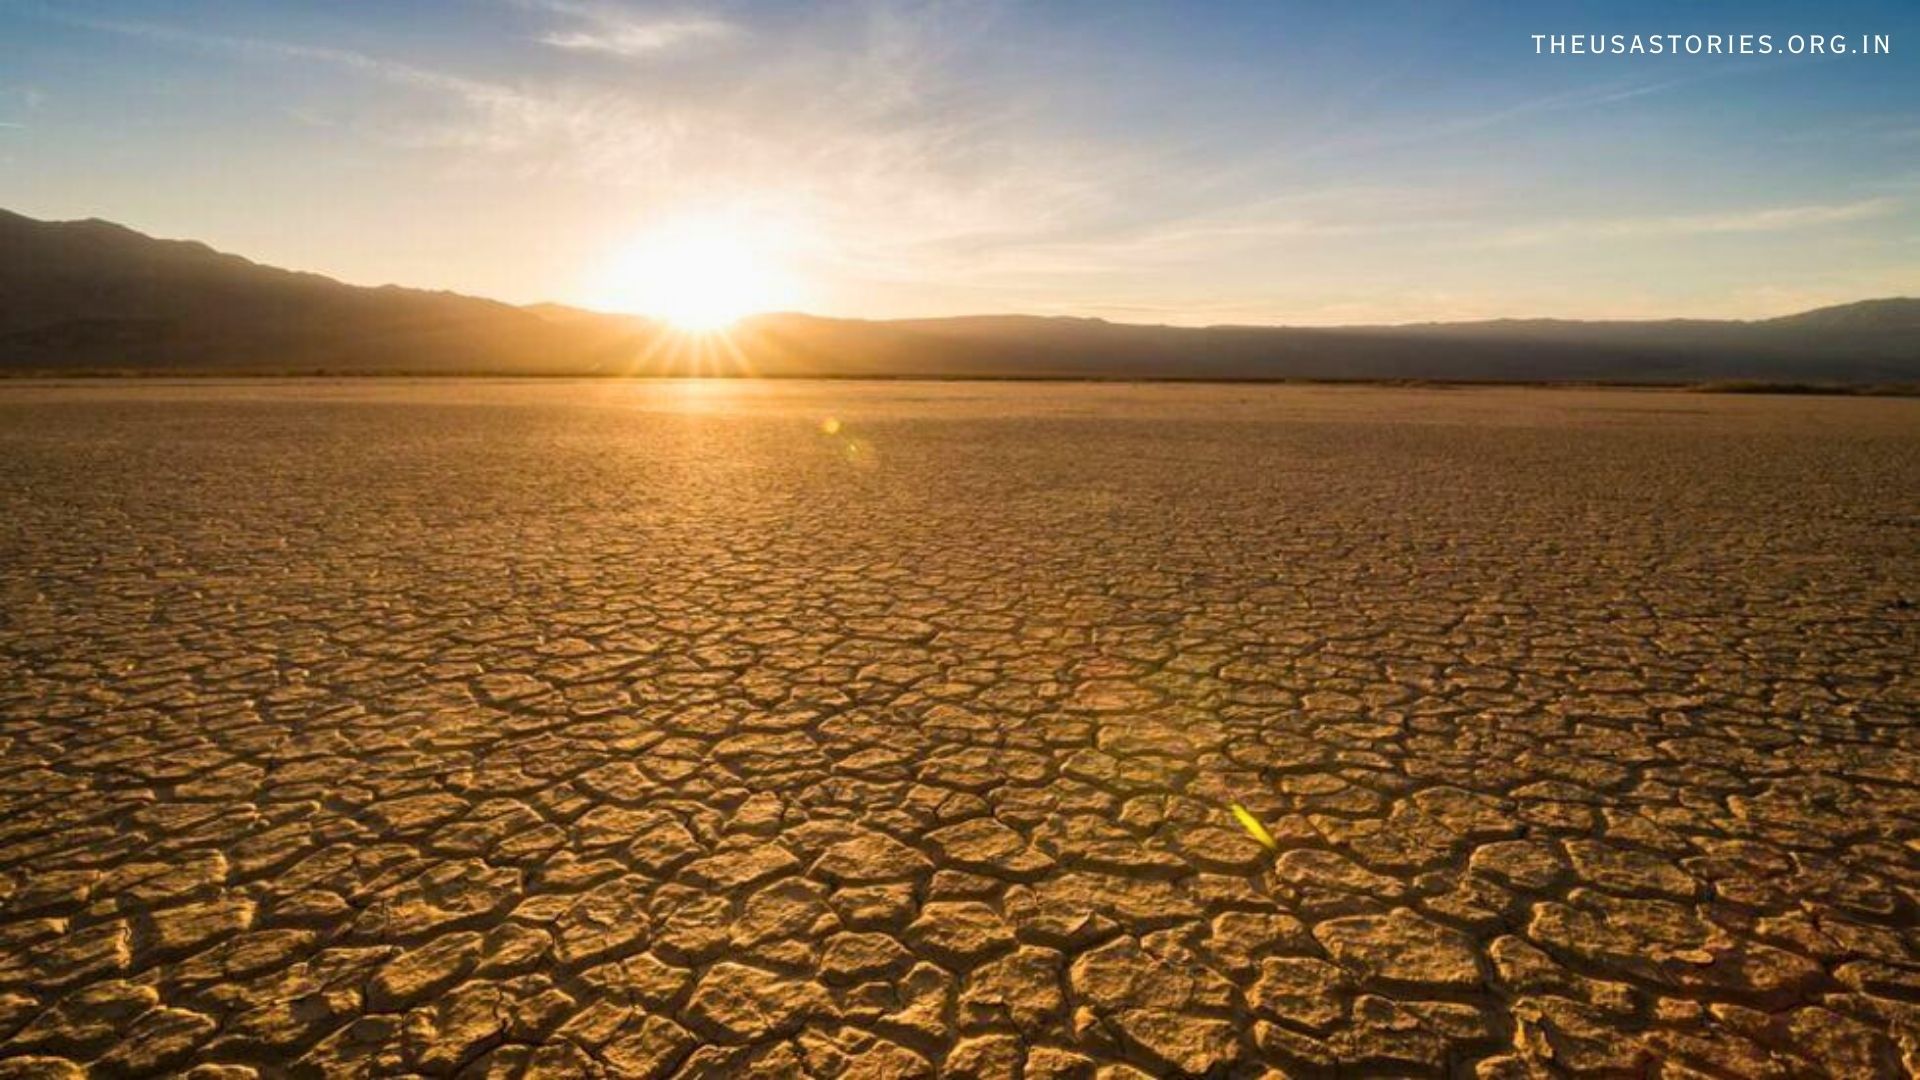 The Hottest Place on Earth: Understanding the Extreme Temperatures in Death Valley, United States